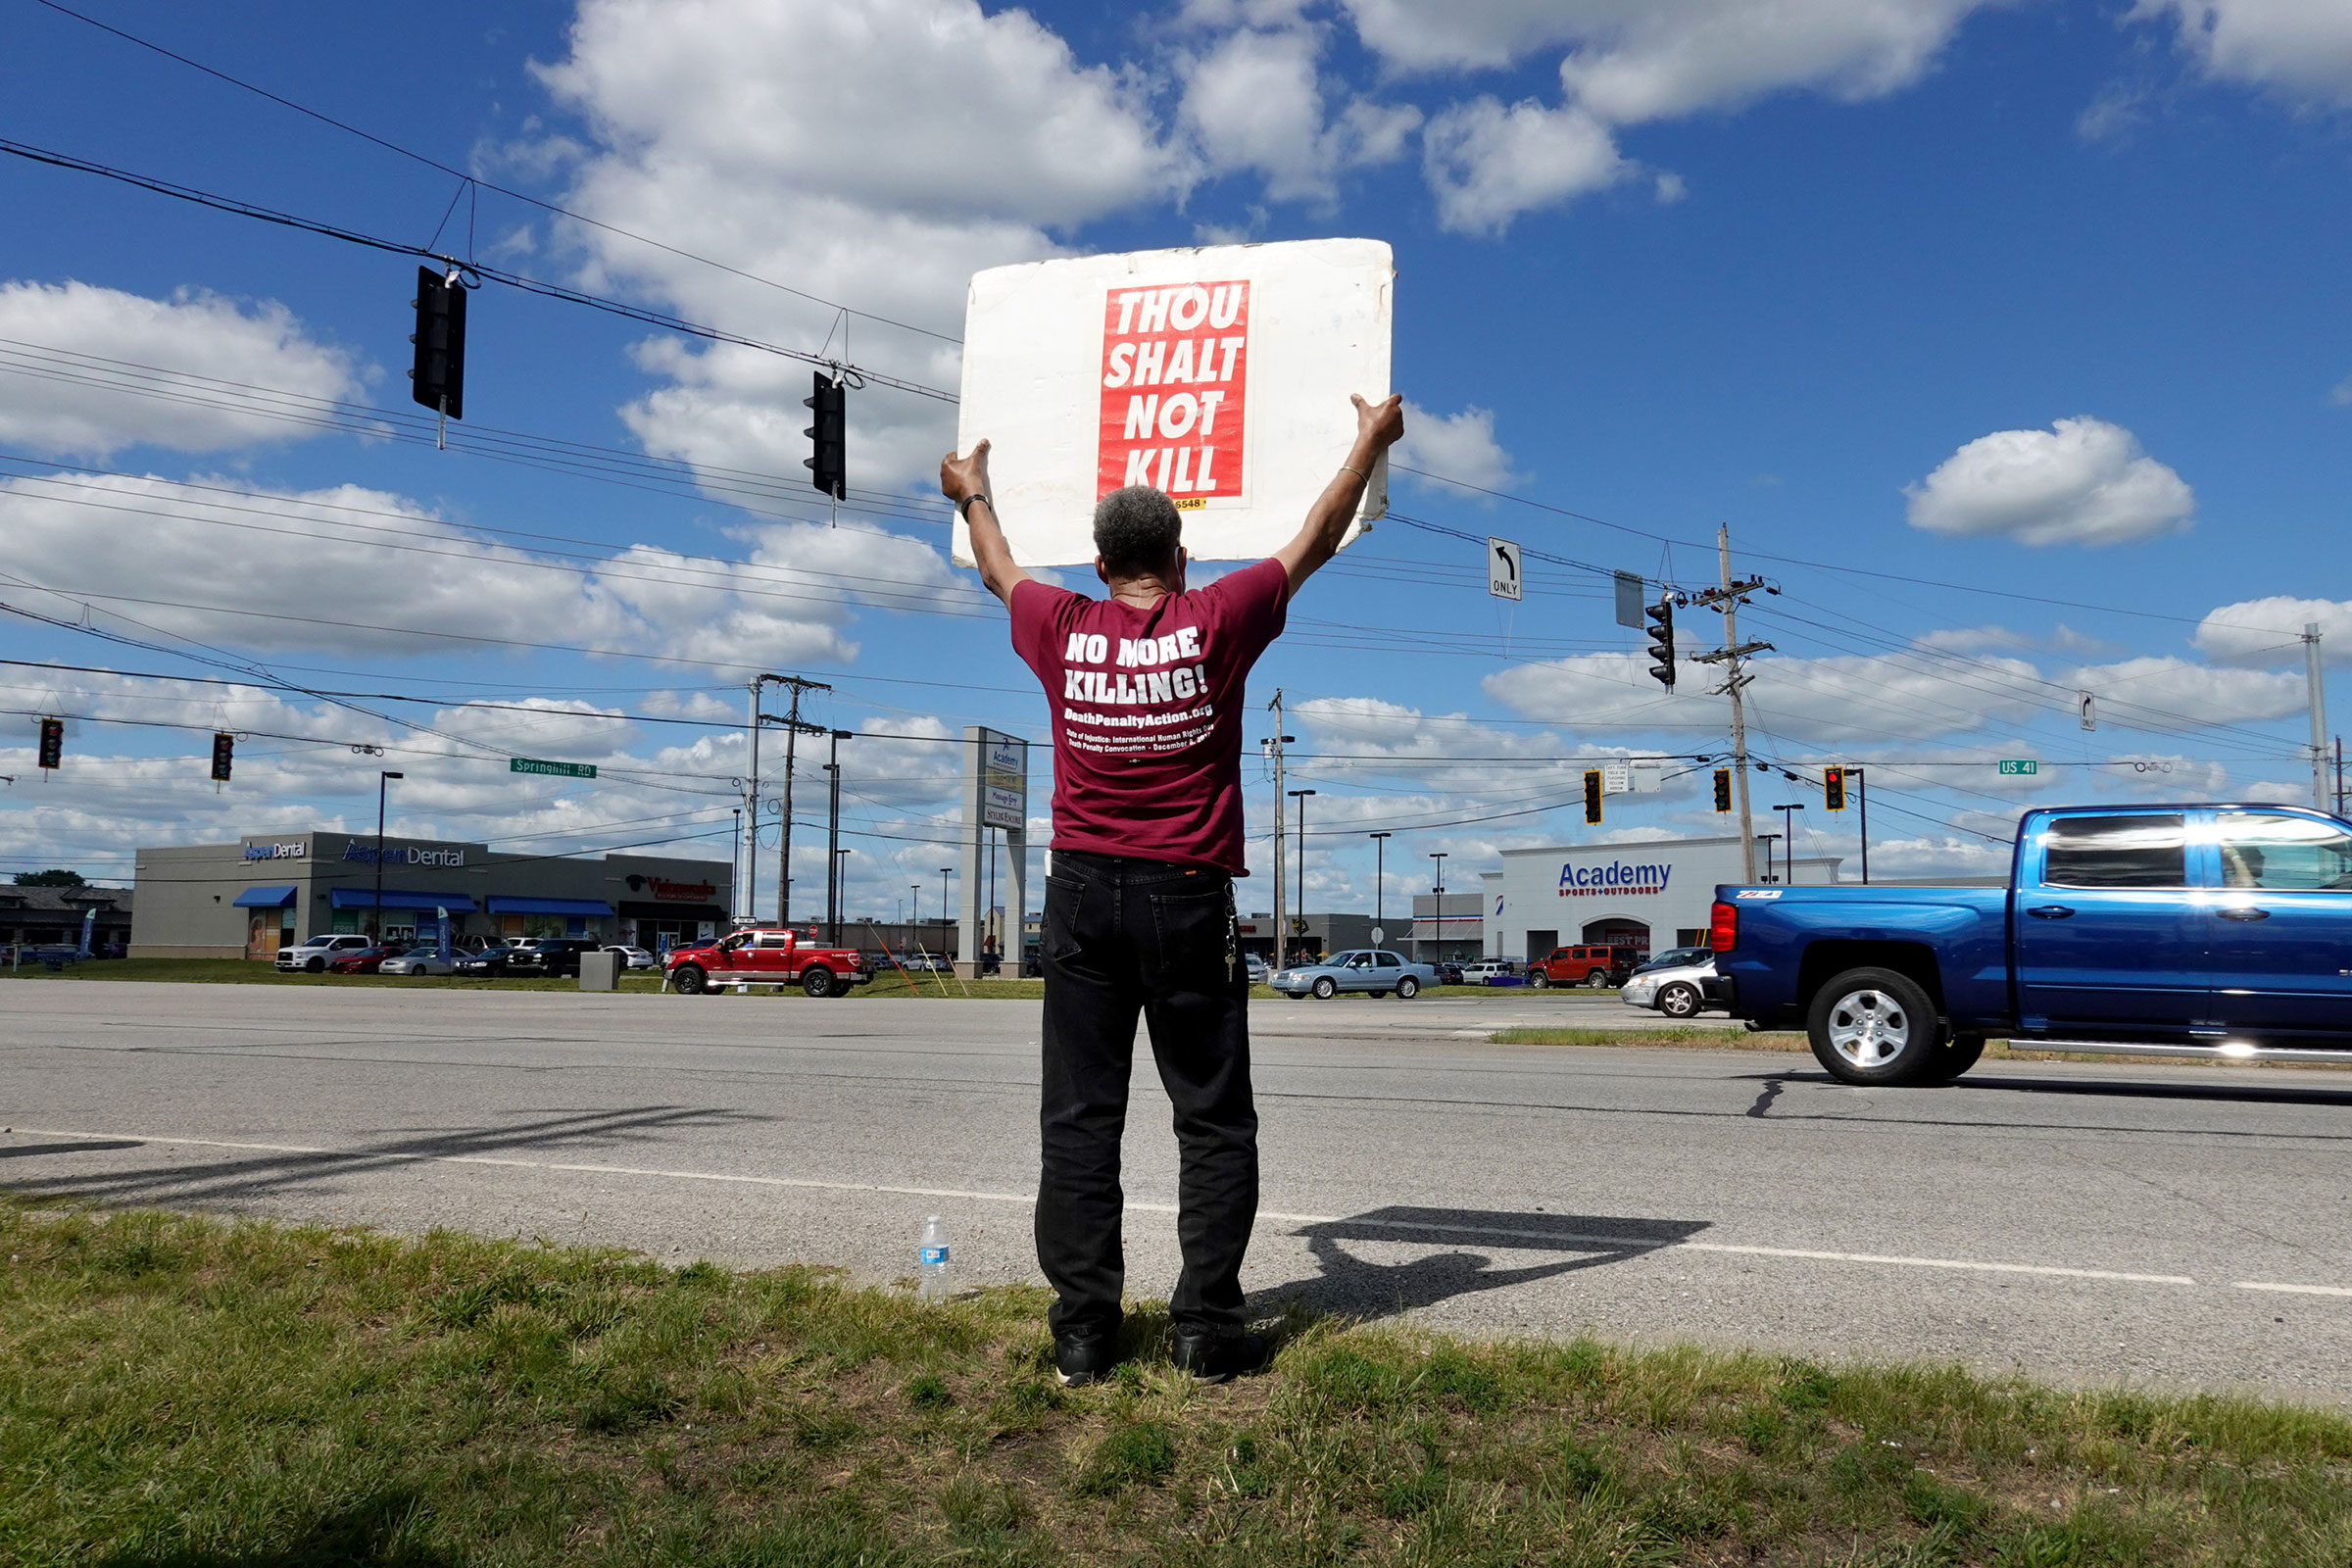 Sylvester Edwards expresses his opposition to the death penalty during a protest near the Federal Correctional Complex where Daniel Lewis Lee is scheduled to be executed on July 13, 2020 in Terre Haute, Indiana. Lee was convicted and sentenced to die for the 1996 killings in Arkansas of gun dealer William Mueller, his wife Nancy, and her 8-year-old daughter Sarah. He is scheduled to be the first federal prisoner put to death since 2003. (Scott Olson—Getty Images)